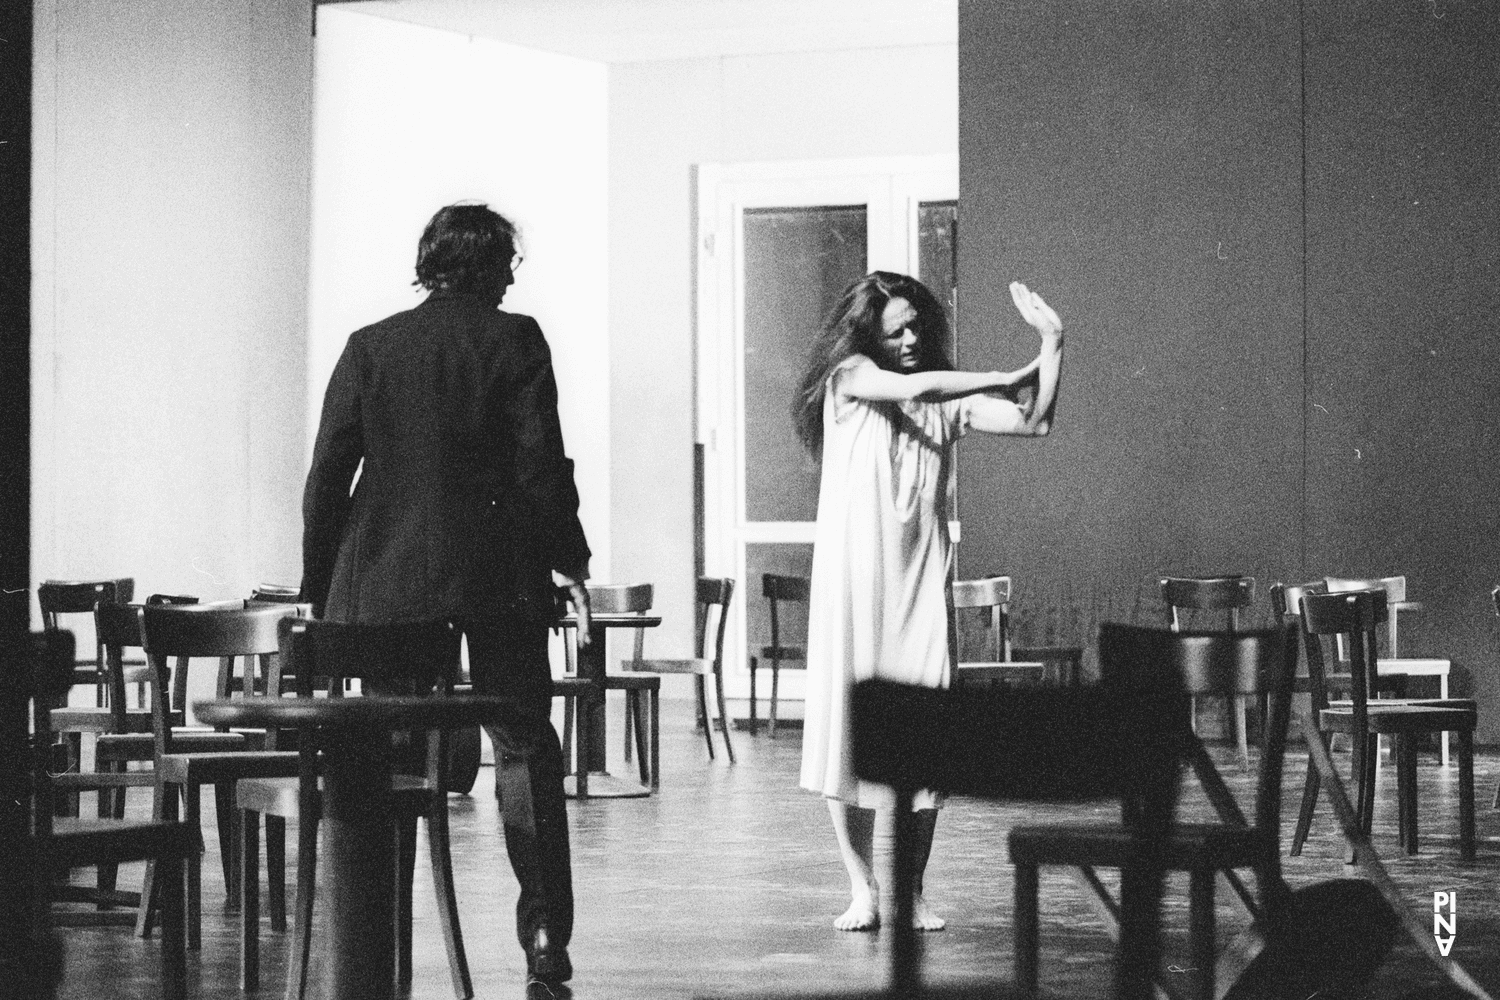 Jean Laurent Sasportes and Malou Airaudo in “Café Müller” by Pina Bausch